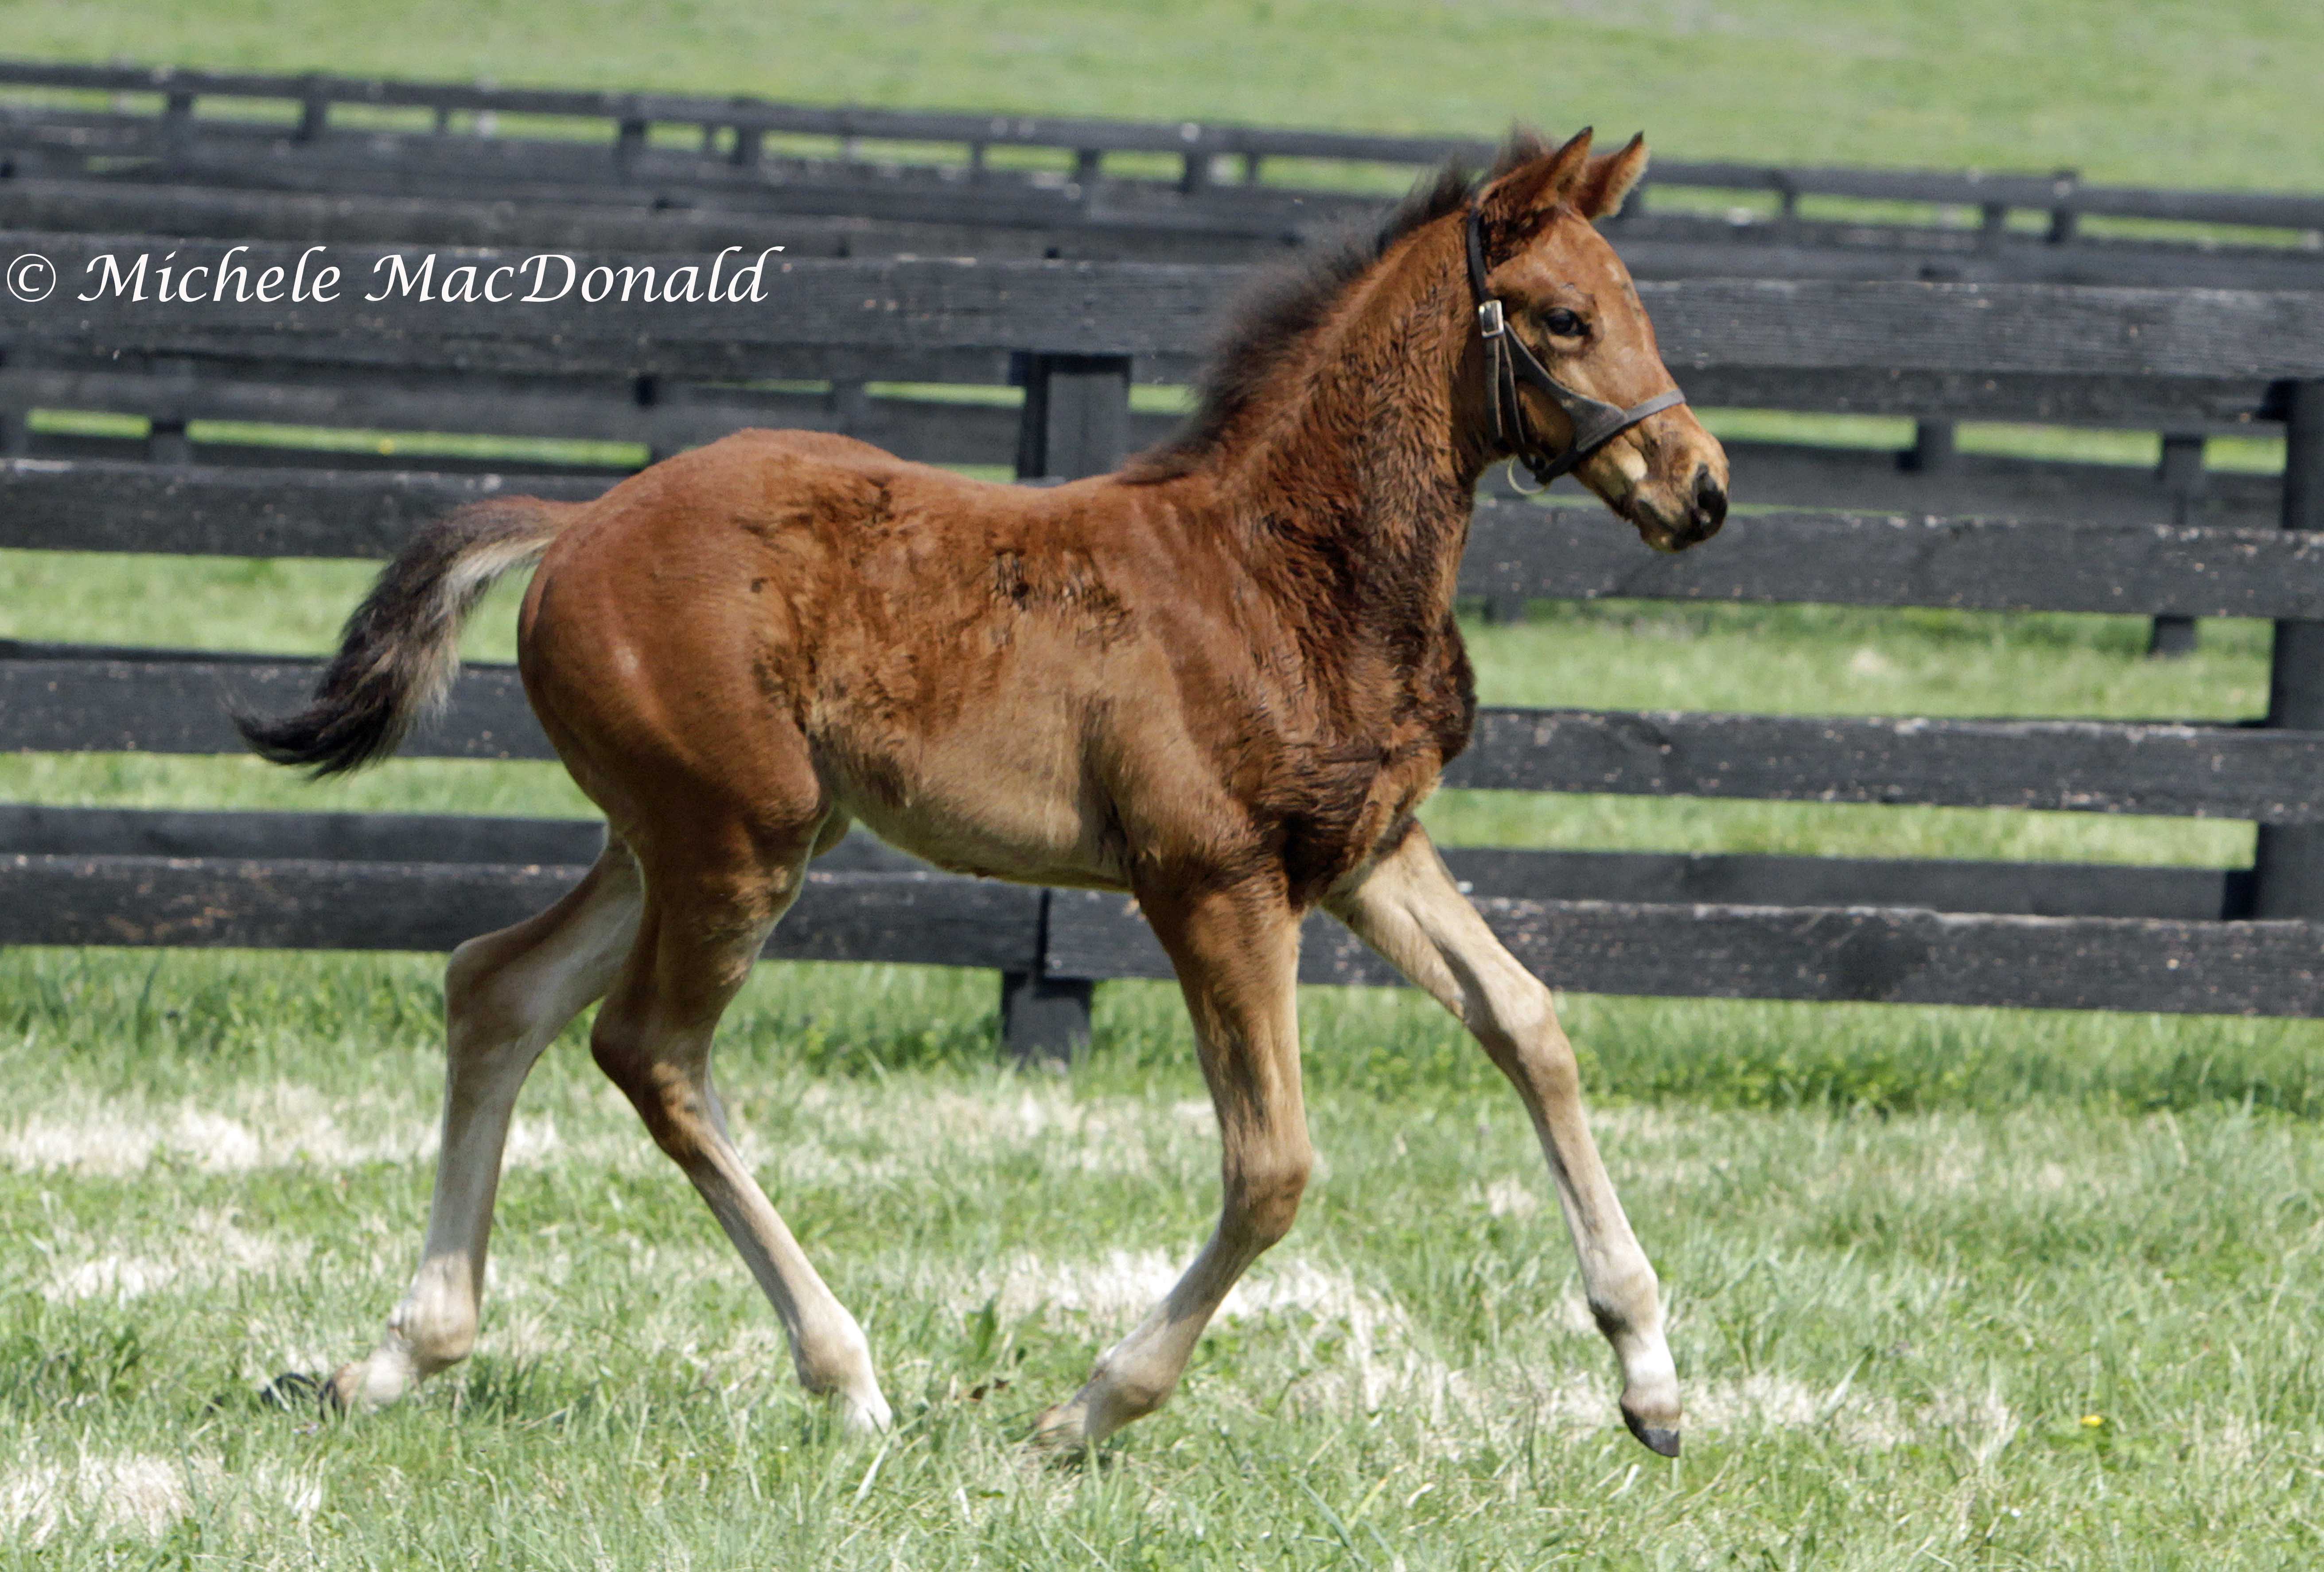 Lady Eli when she was a foal at Runnymede: “Everything you asked her to do, she did well,” says Chief Executive Brutus J Clay. Photo: Michele MacDonald